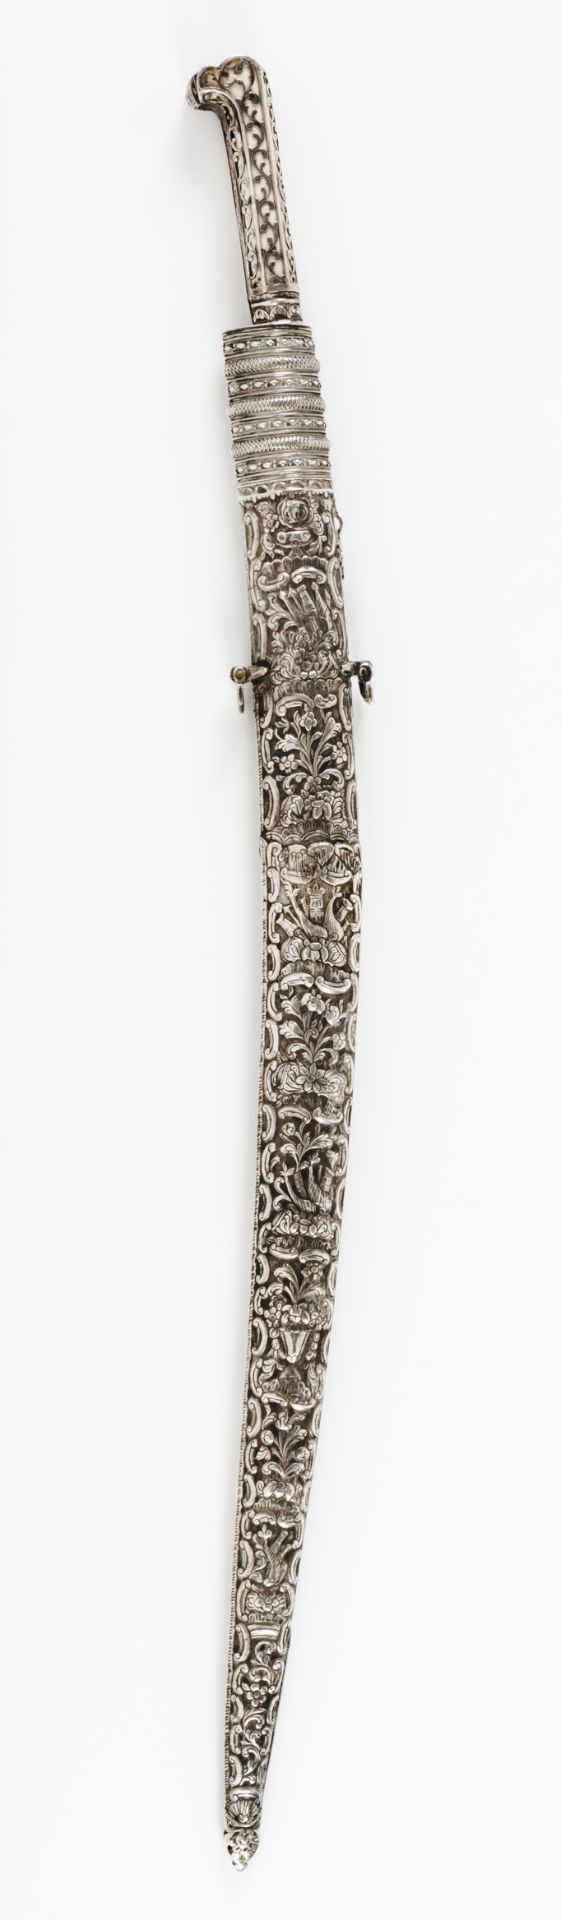 An Ottoman iataghanOttoman silver Camel bone hilt of scalloped and raised applied silver - Image 2 of 6